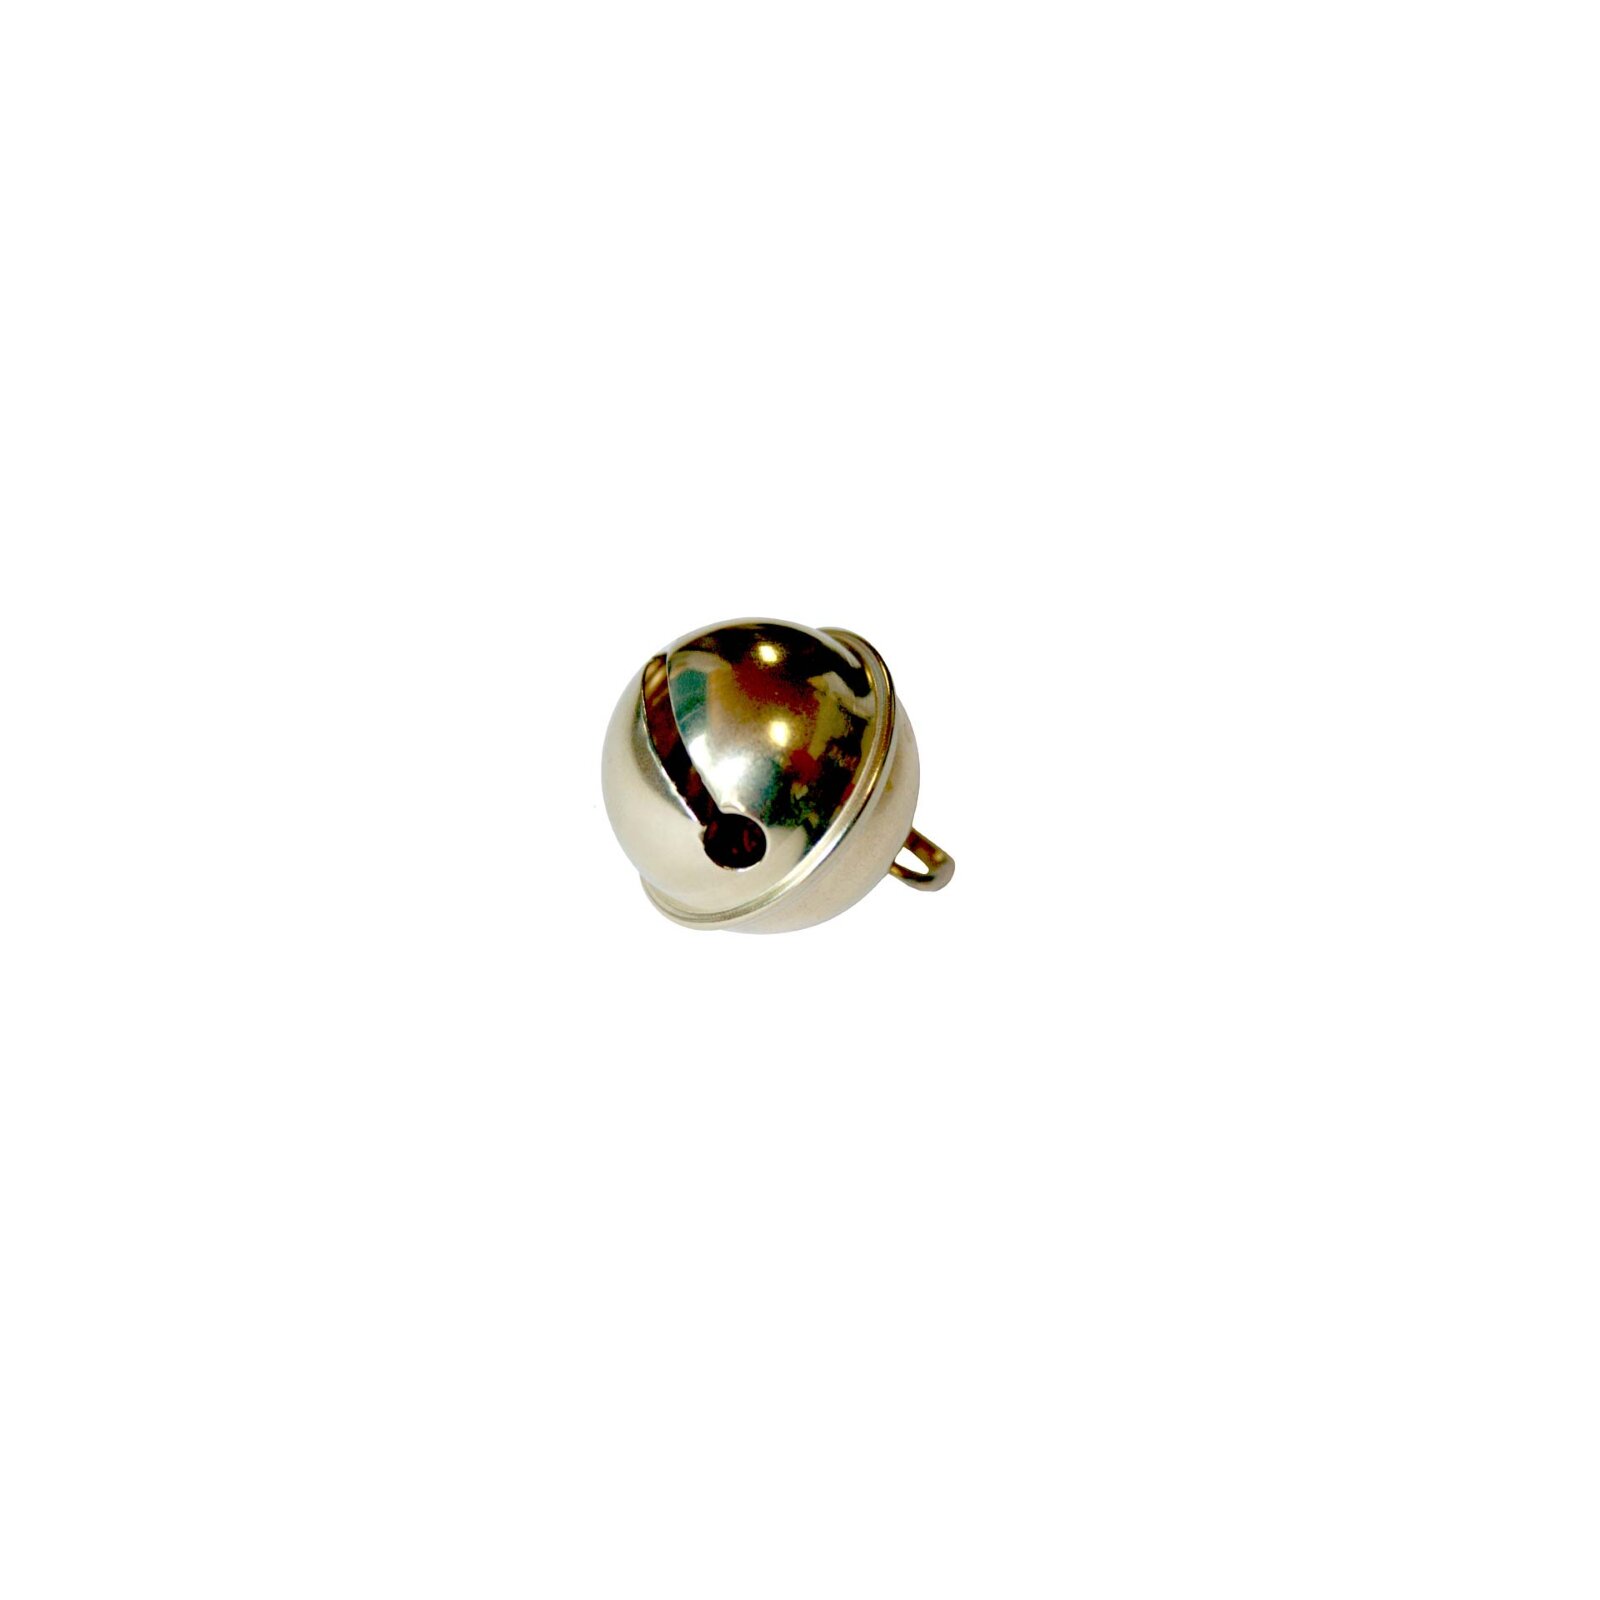 Earth bell with ring 24 mm (38720504) : photo 1